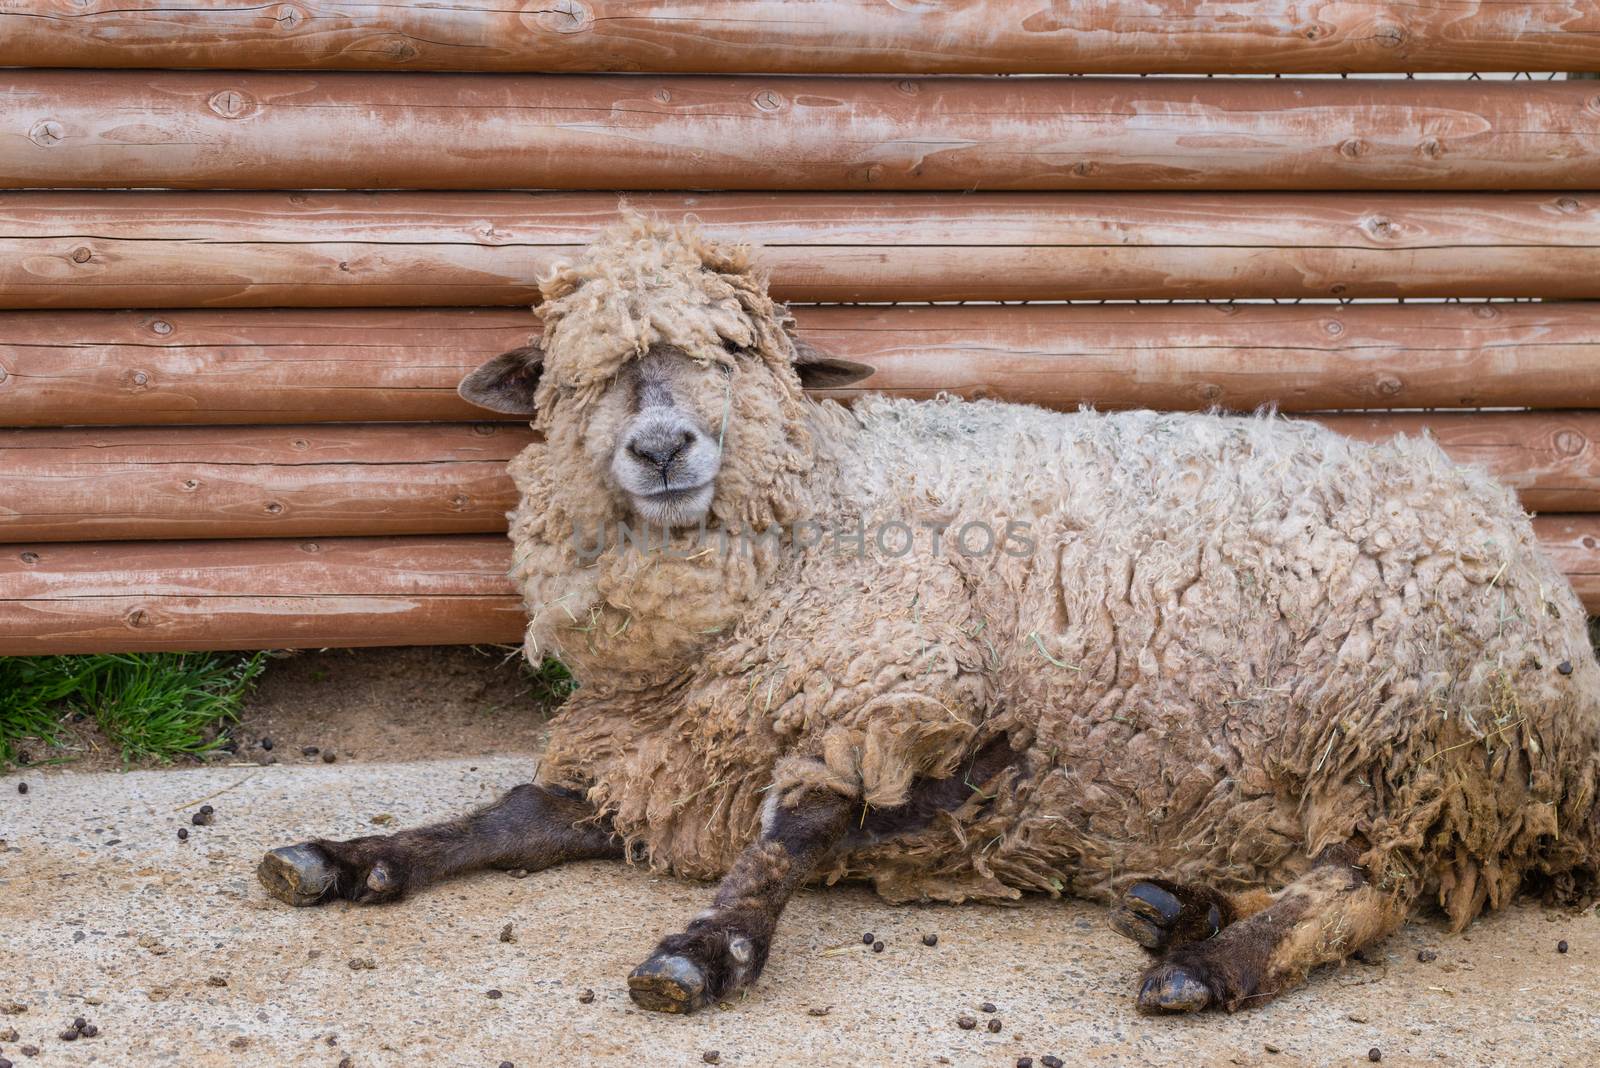 A dirty, lazy and sleepy looking sheep.